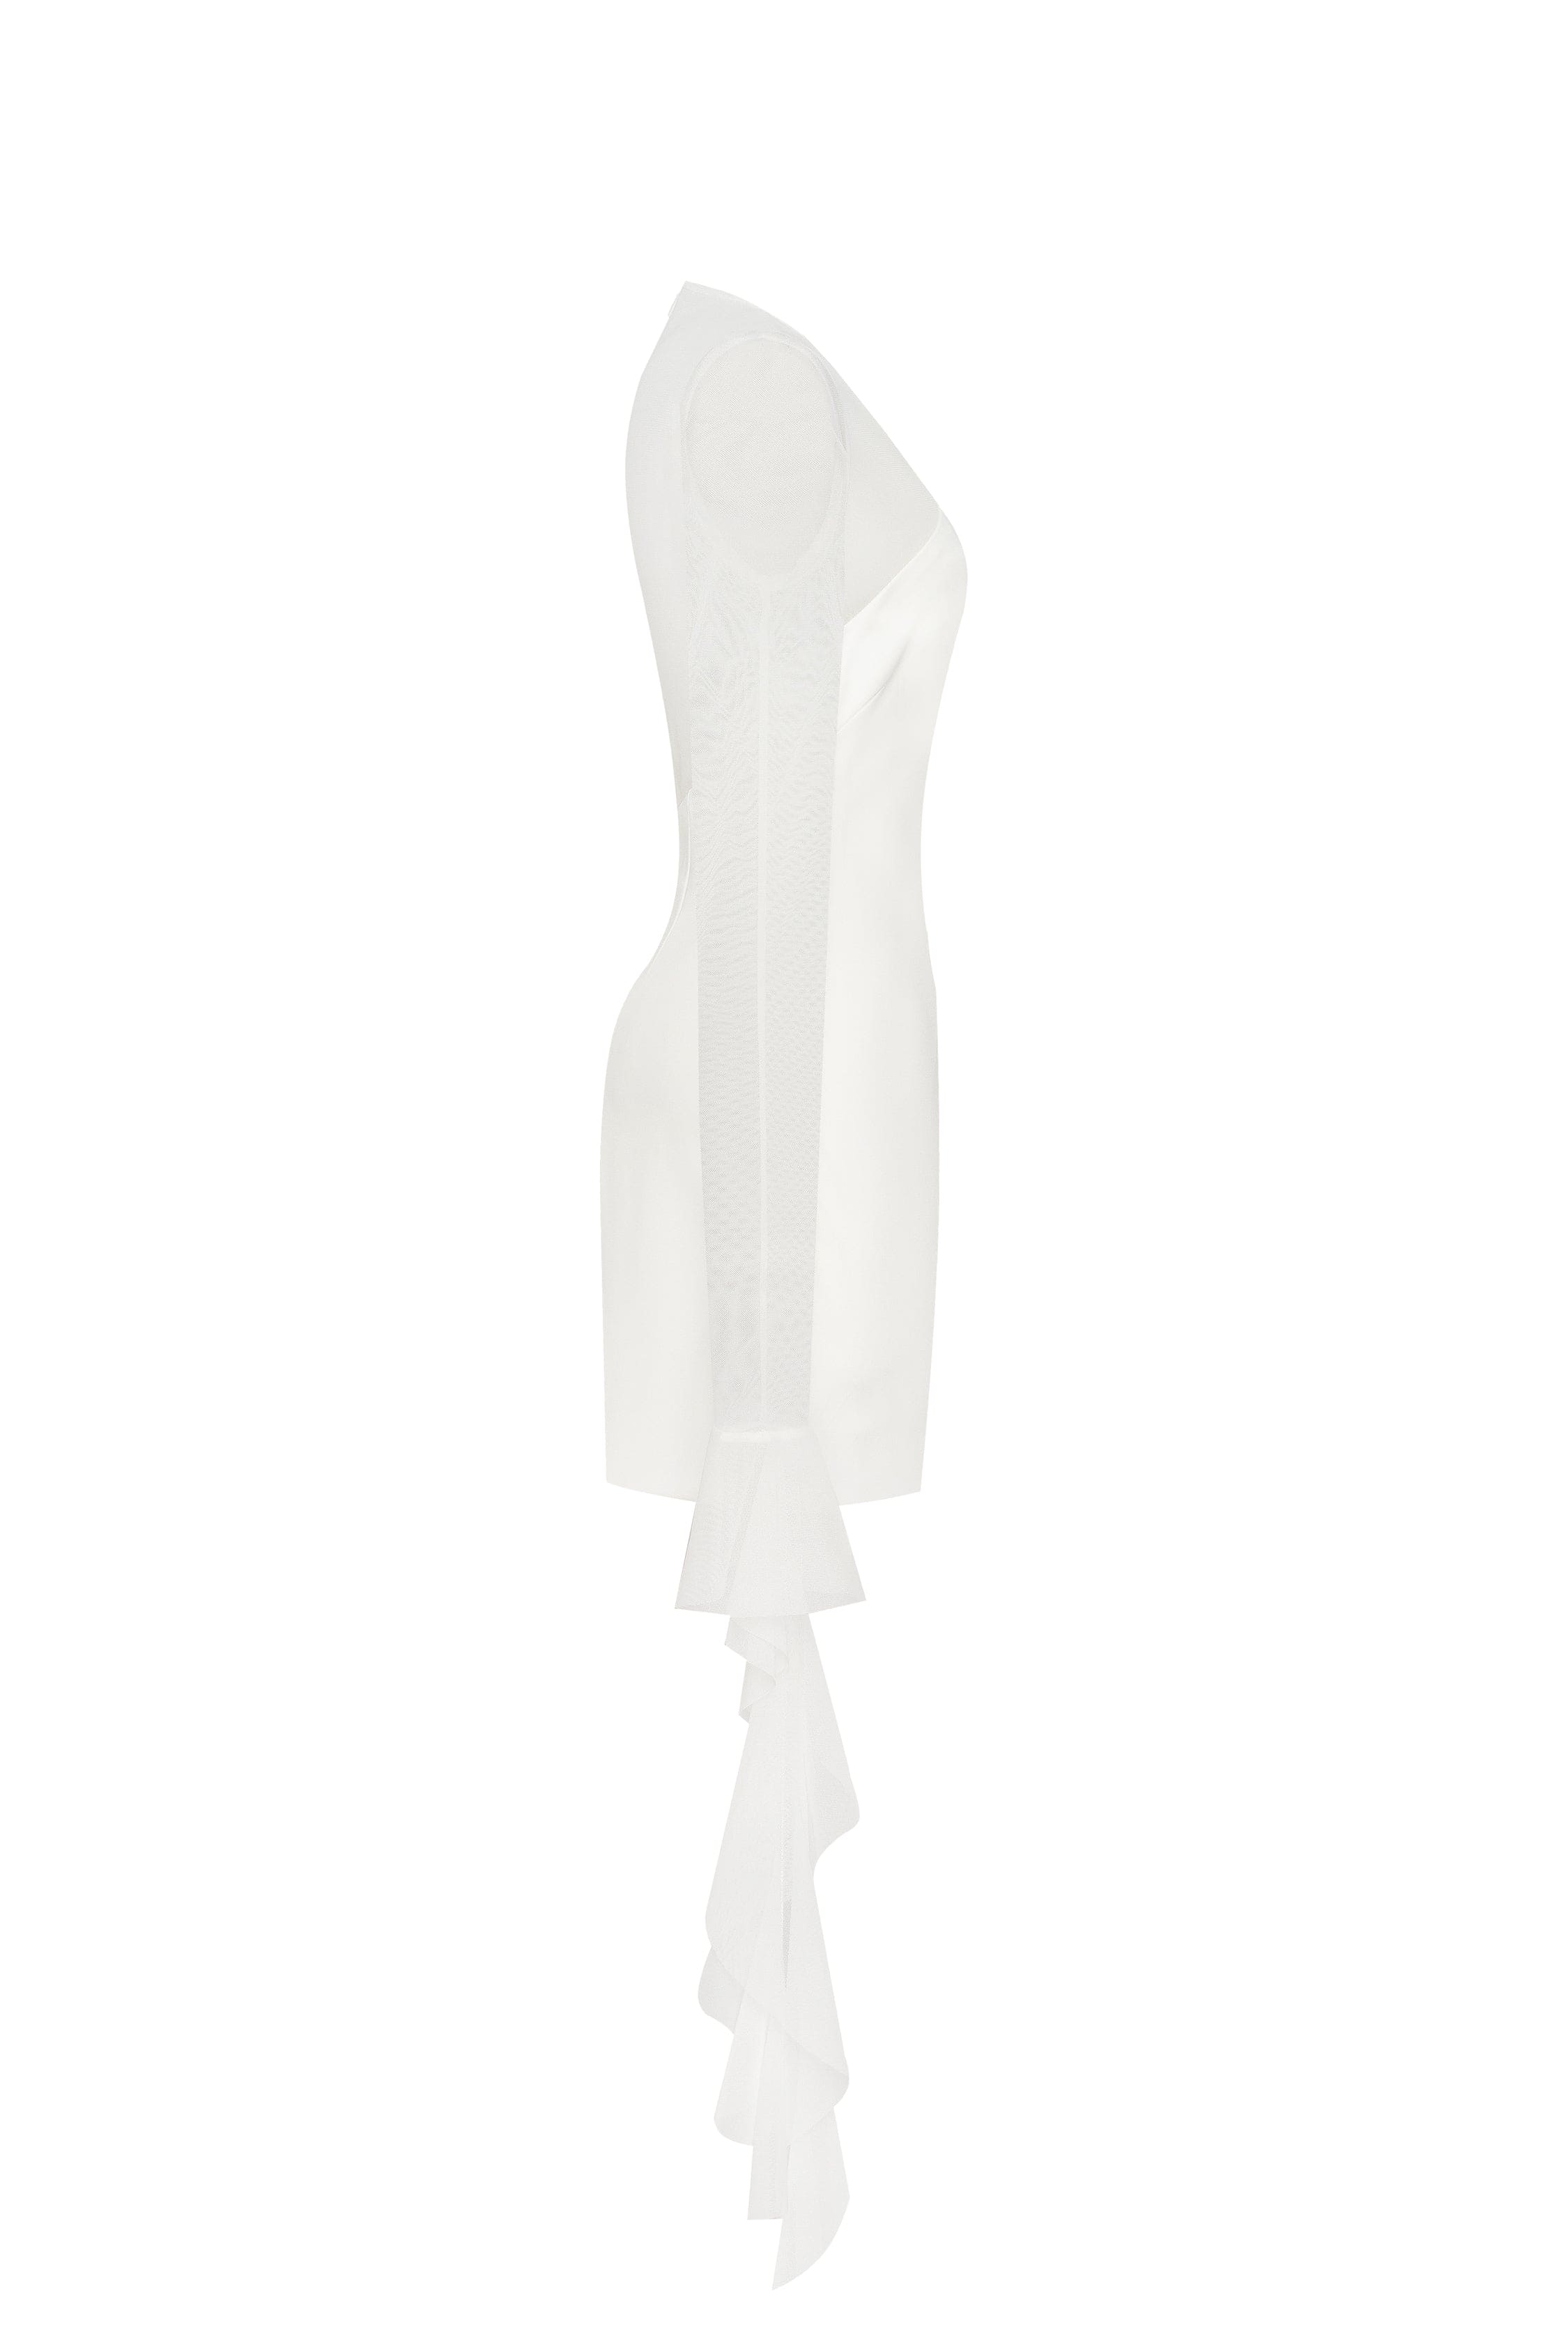 Stunning one-shoulder mini dress with sheer inserts in white, Xo Xo